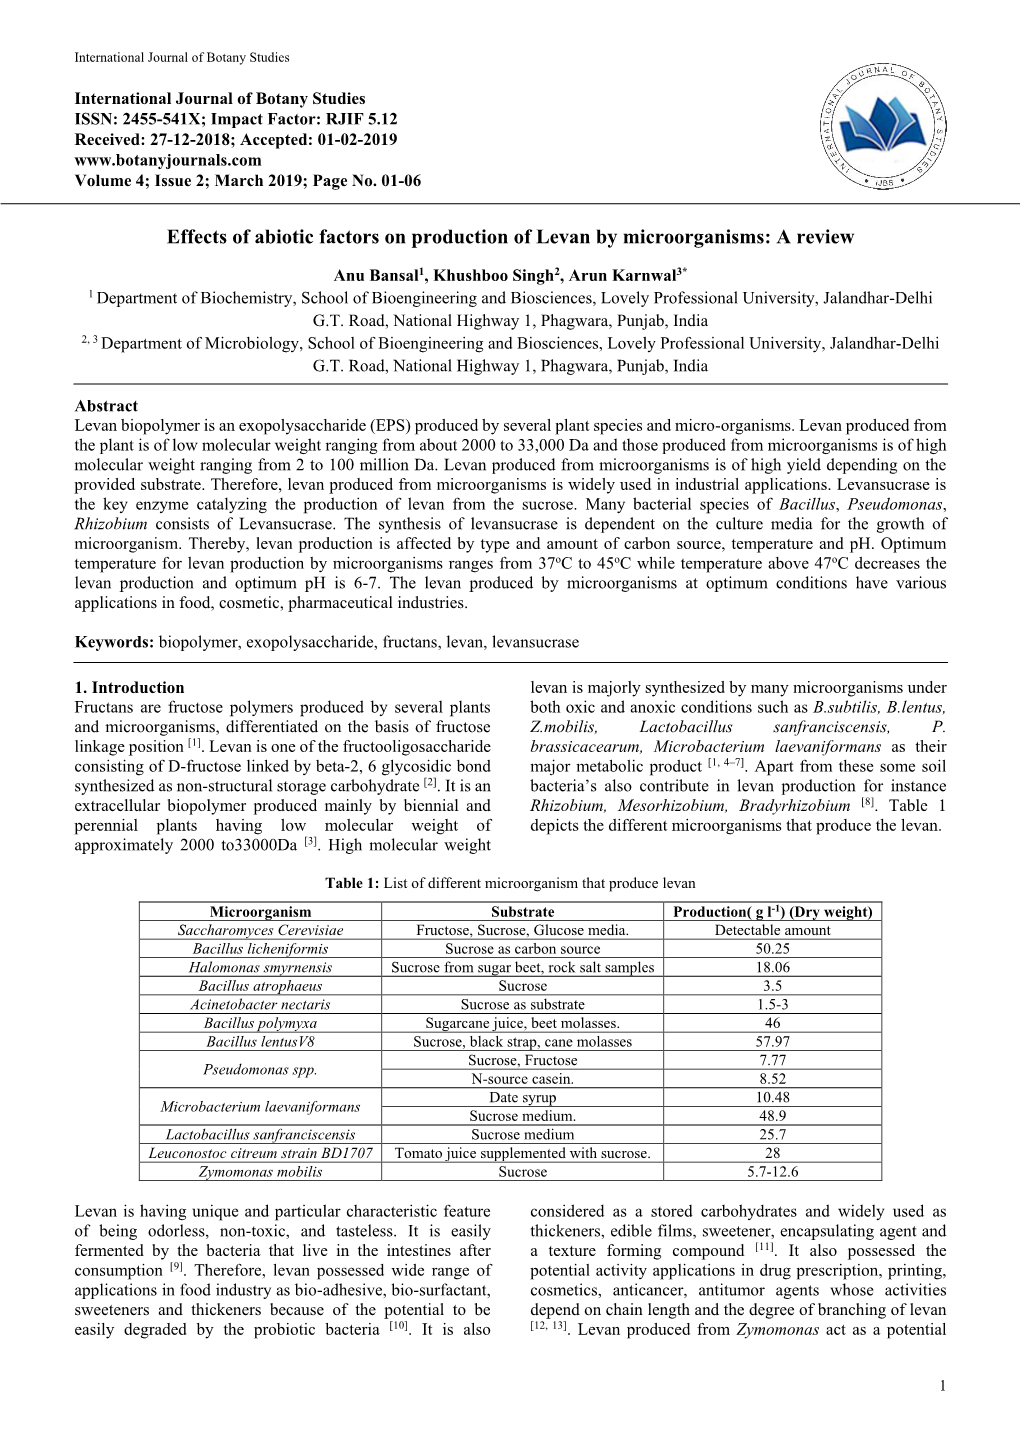 Effects of Abiotic Factors on Production of Levan by Microorganisms: a Review